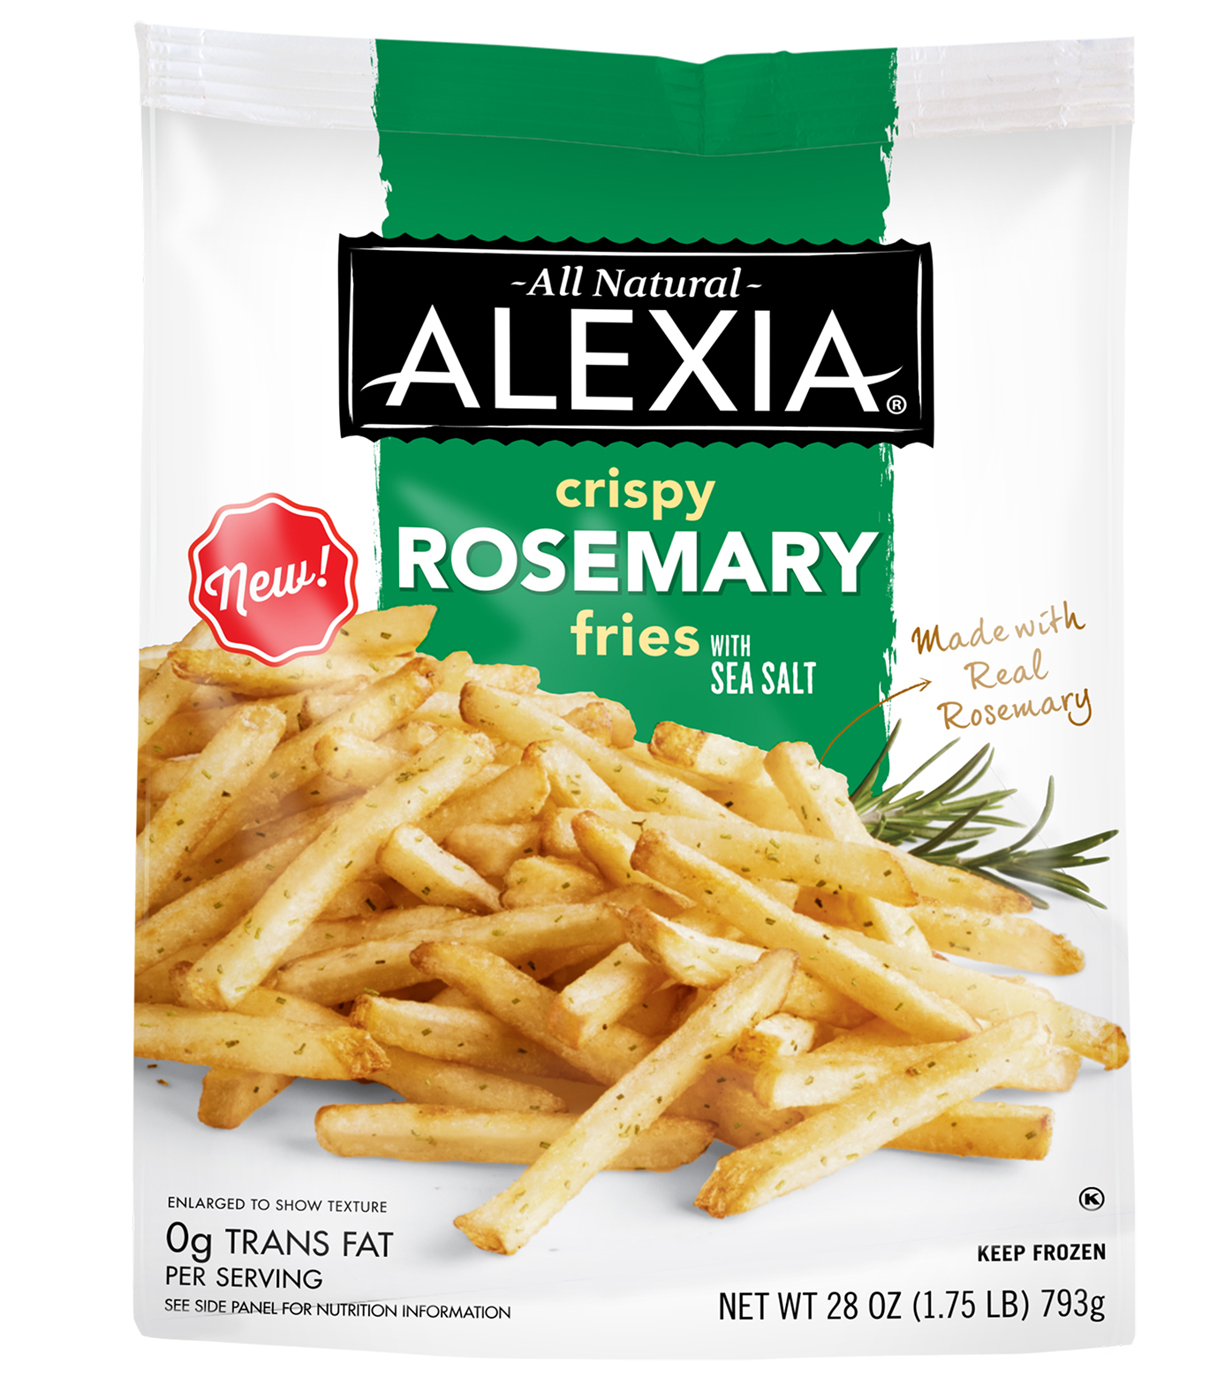 Alexia-rosemary-fries-packaging